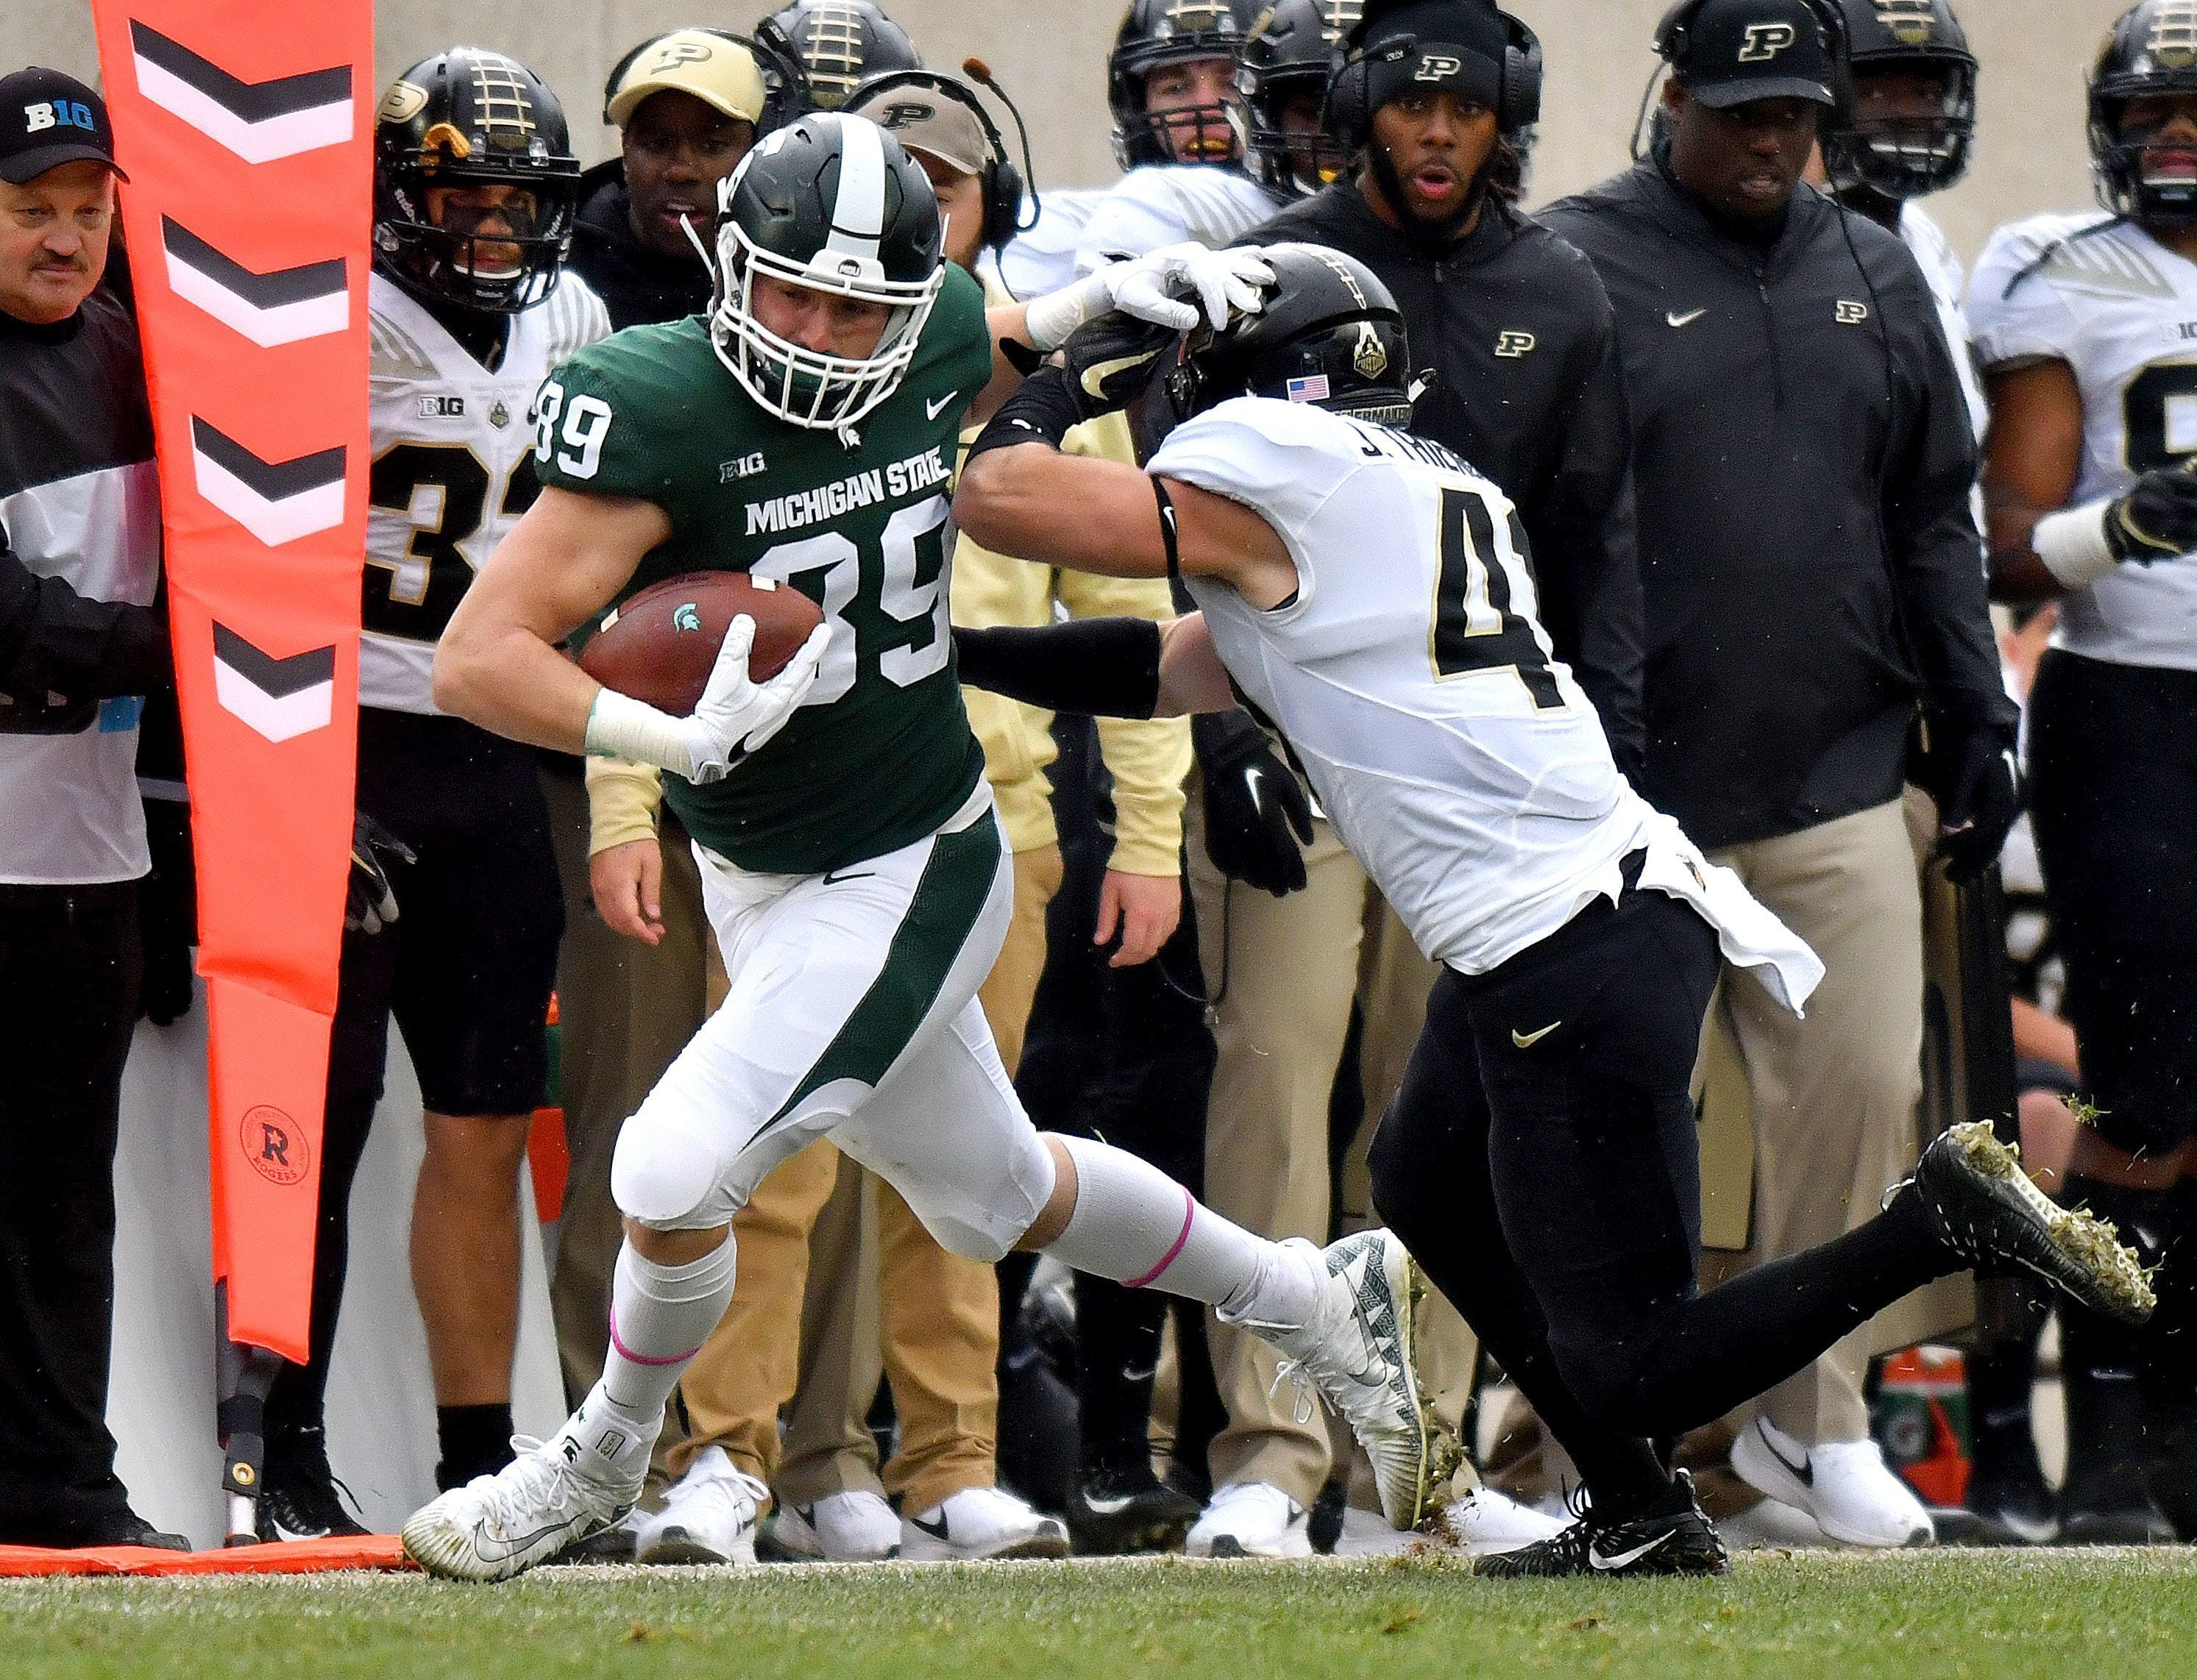 Matt Dotson among Spartans not on Michigan State&#39;s spring roster